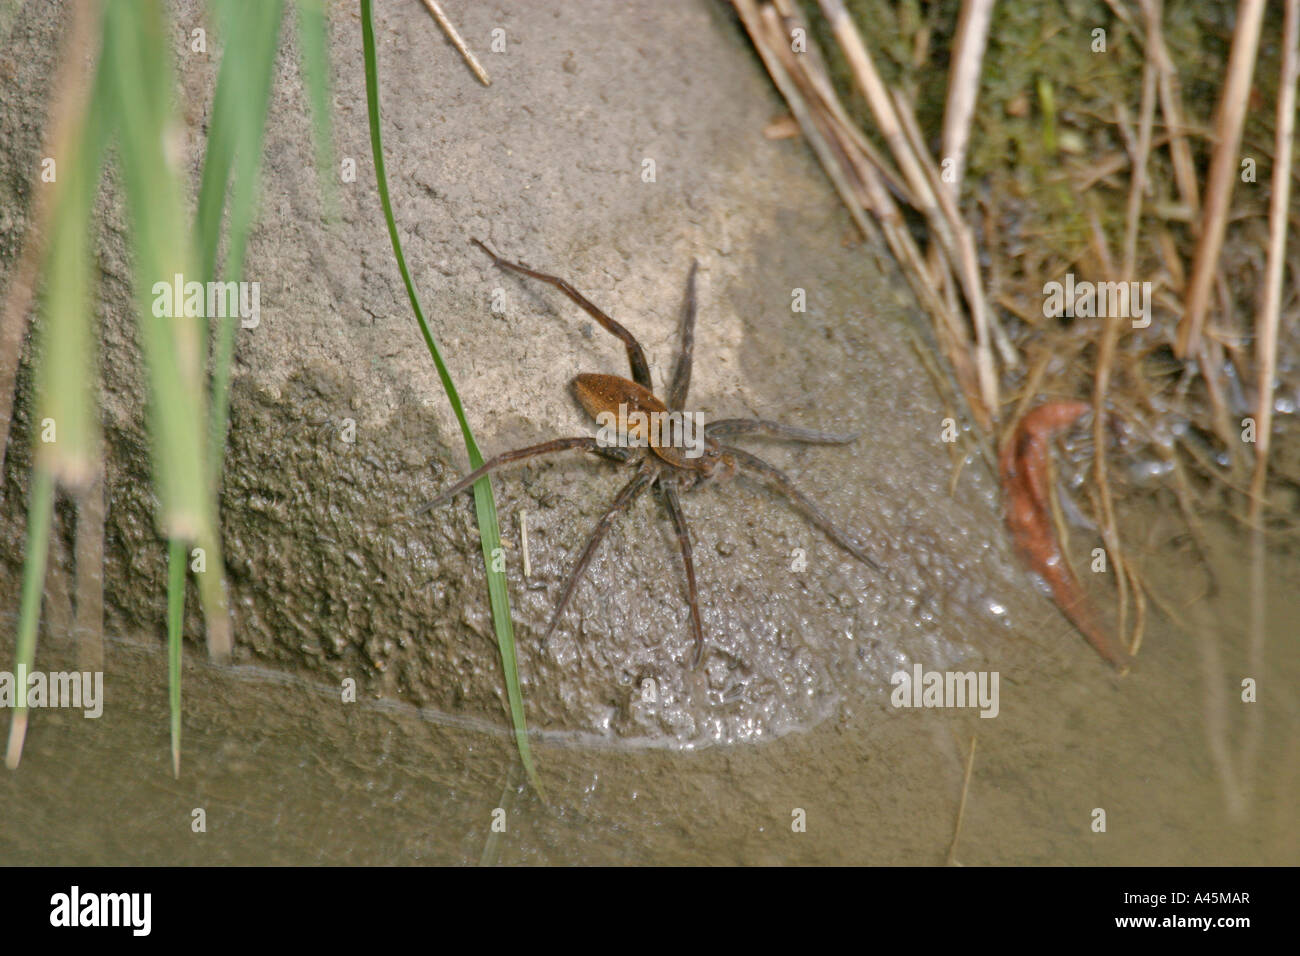 RAFT SPIDER DOLOMEDES PLANTARIUS AT EDGE OF WATER TV Stock Photo